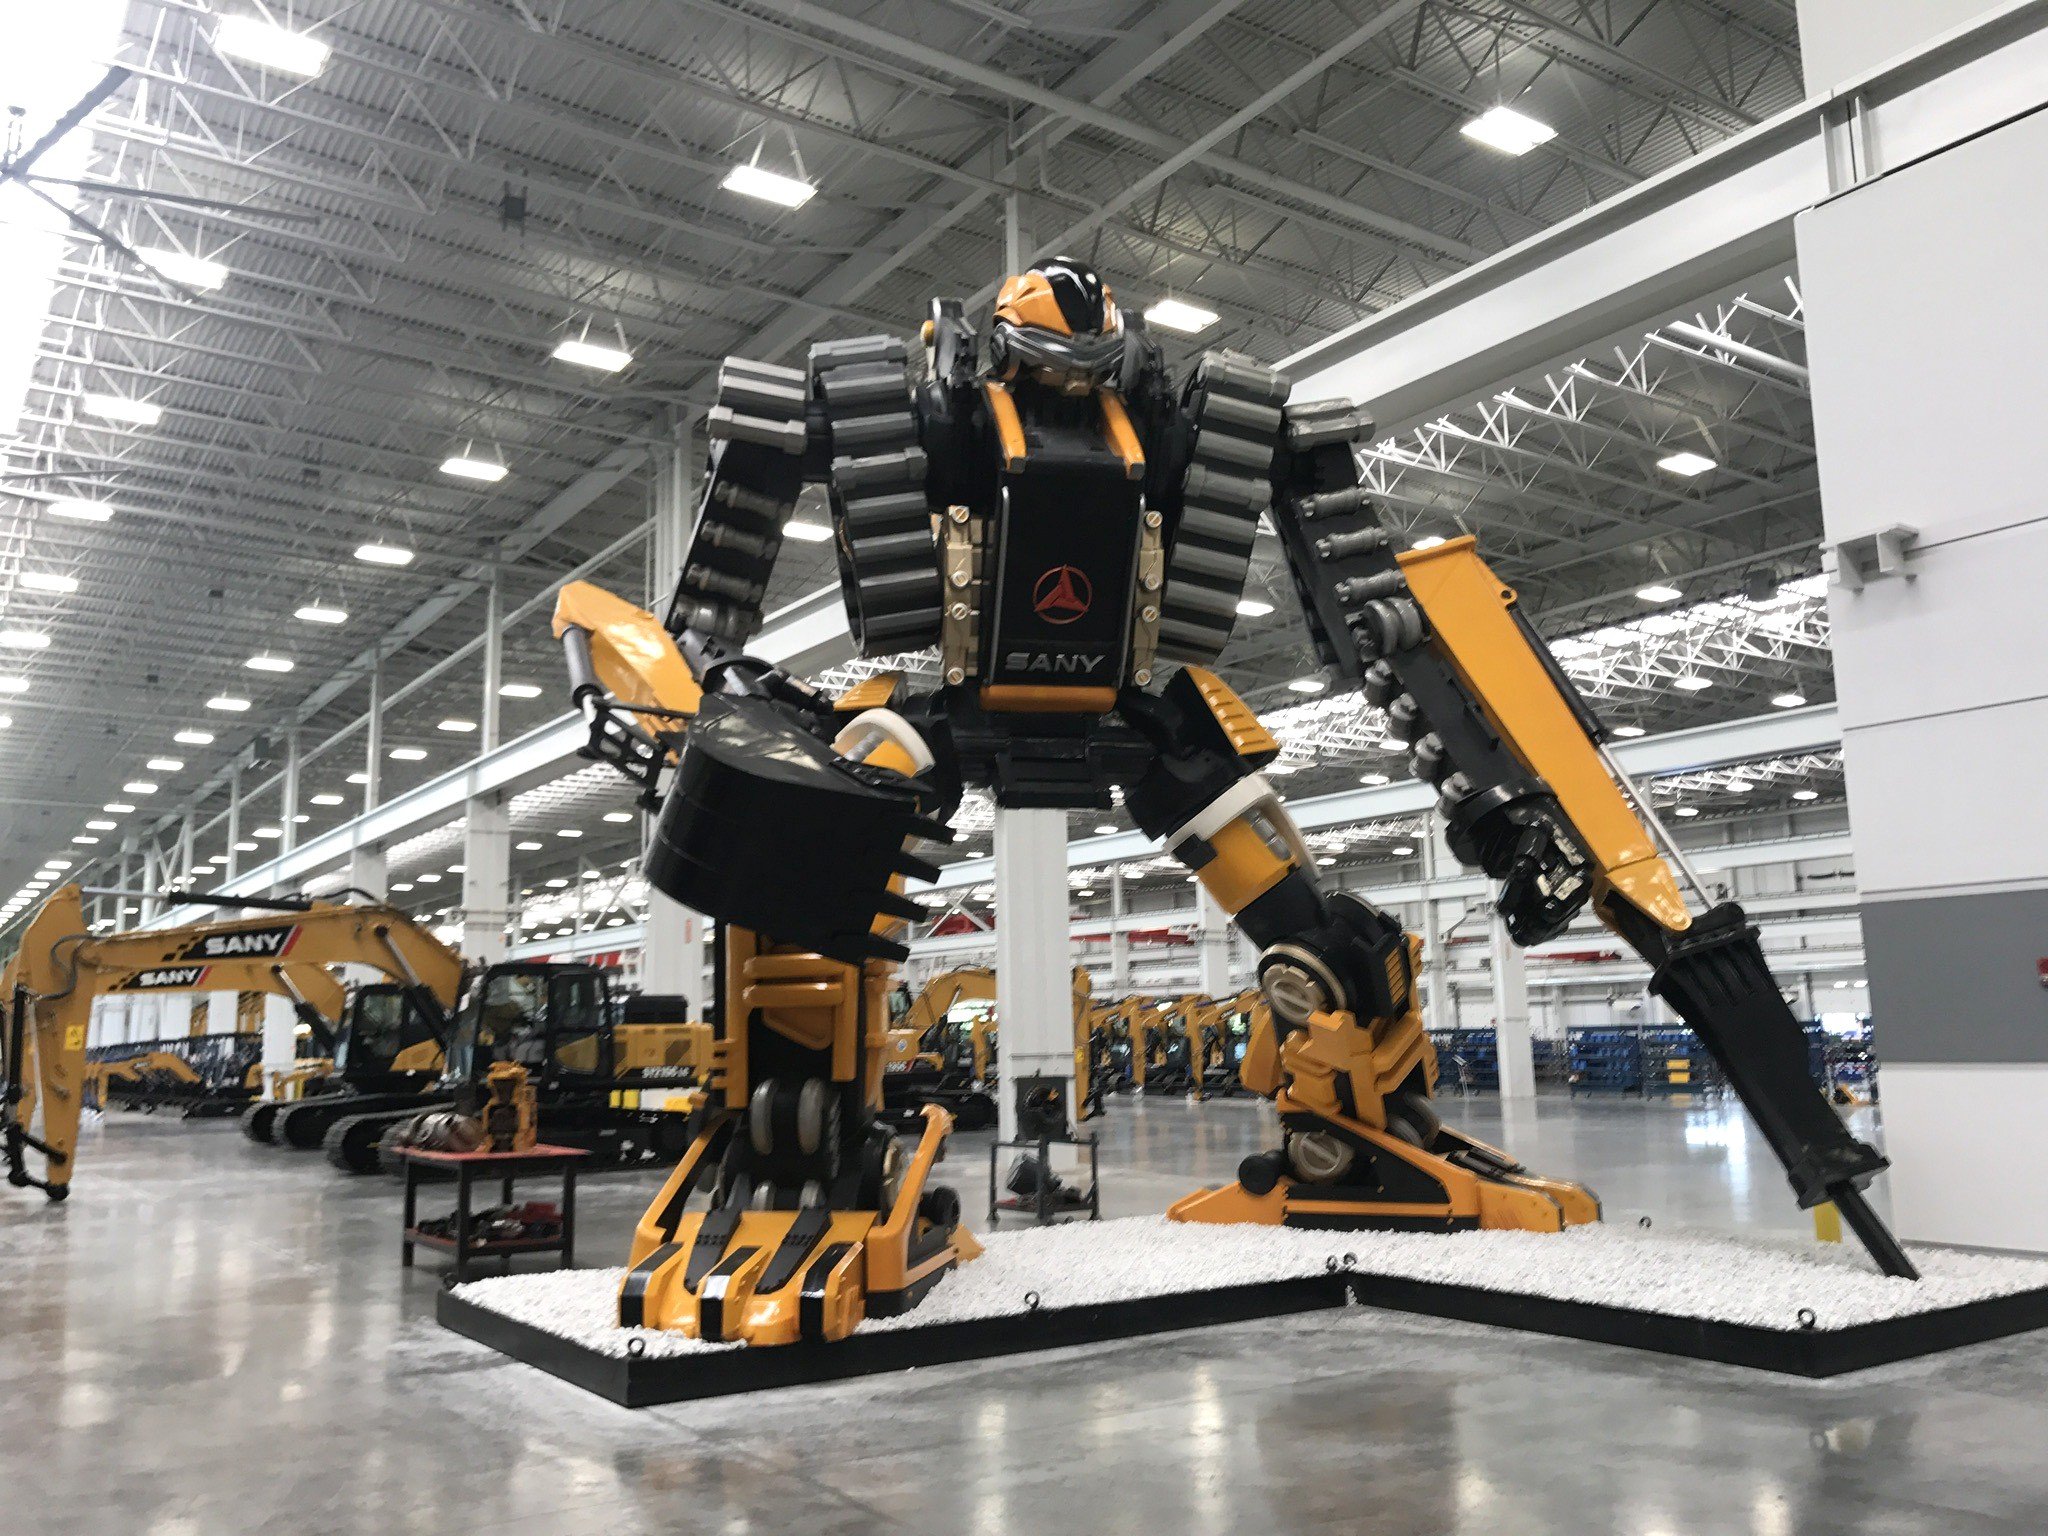 The Transformer-like ‘Traxx’, which has been adapted from an excavator, at Sany America’s headquarters in Peachtree City, Georgia. Sany said Traxx is displayed during big conferences and events. Photo: Yujing Liu